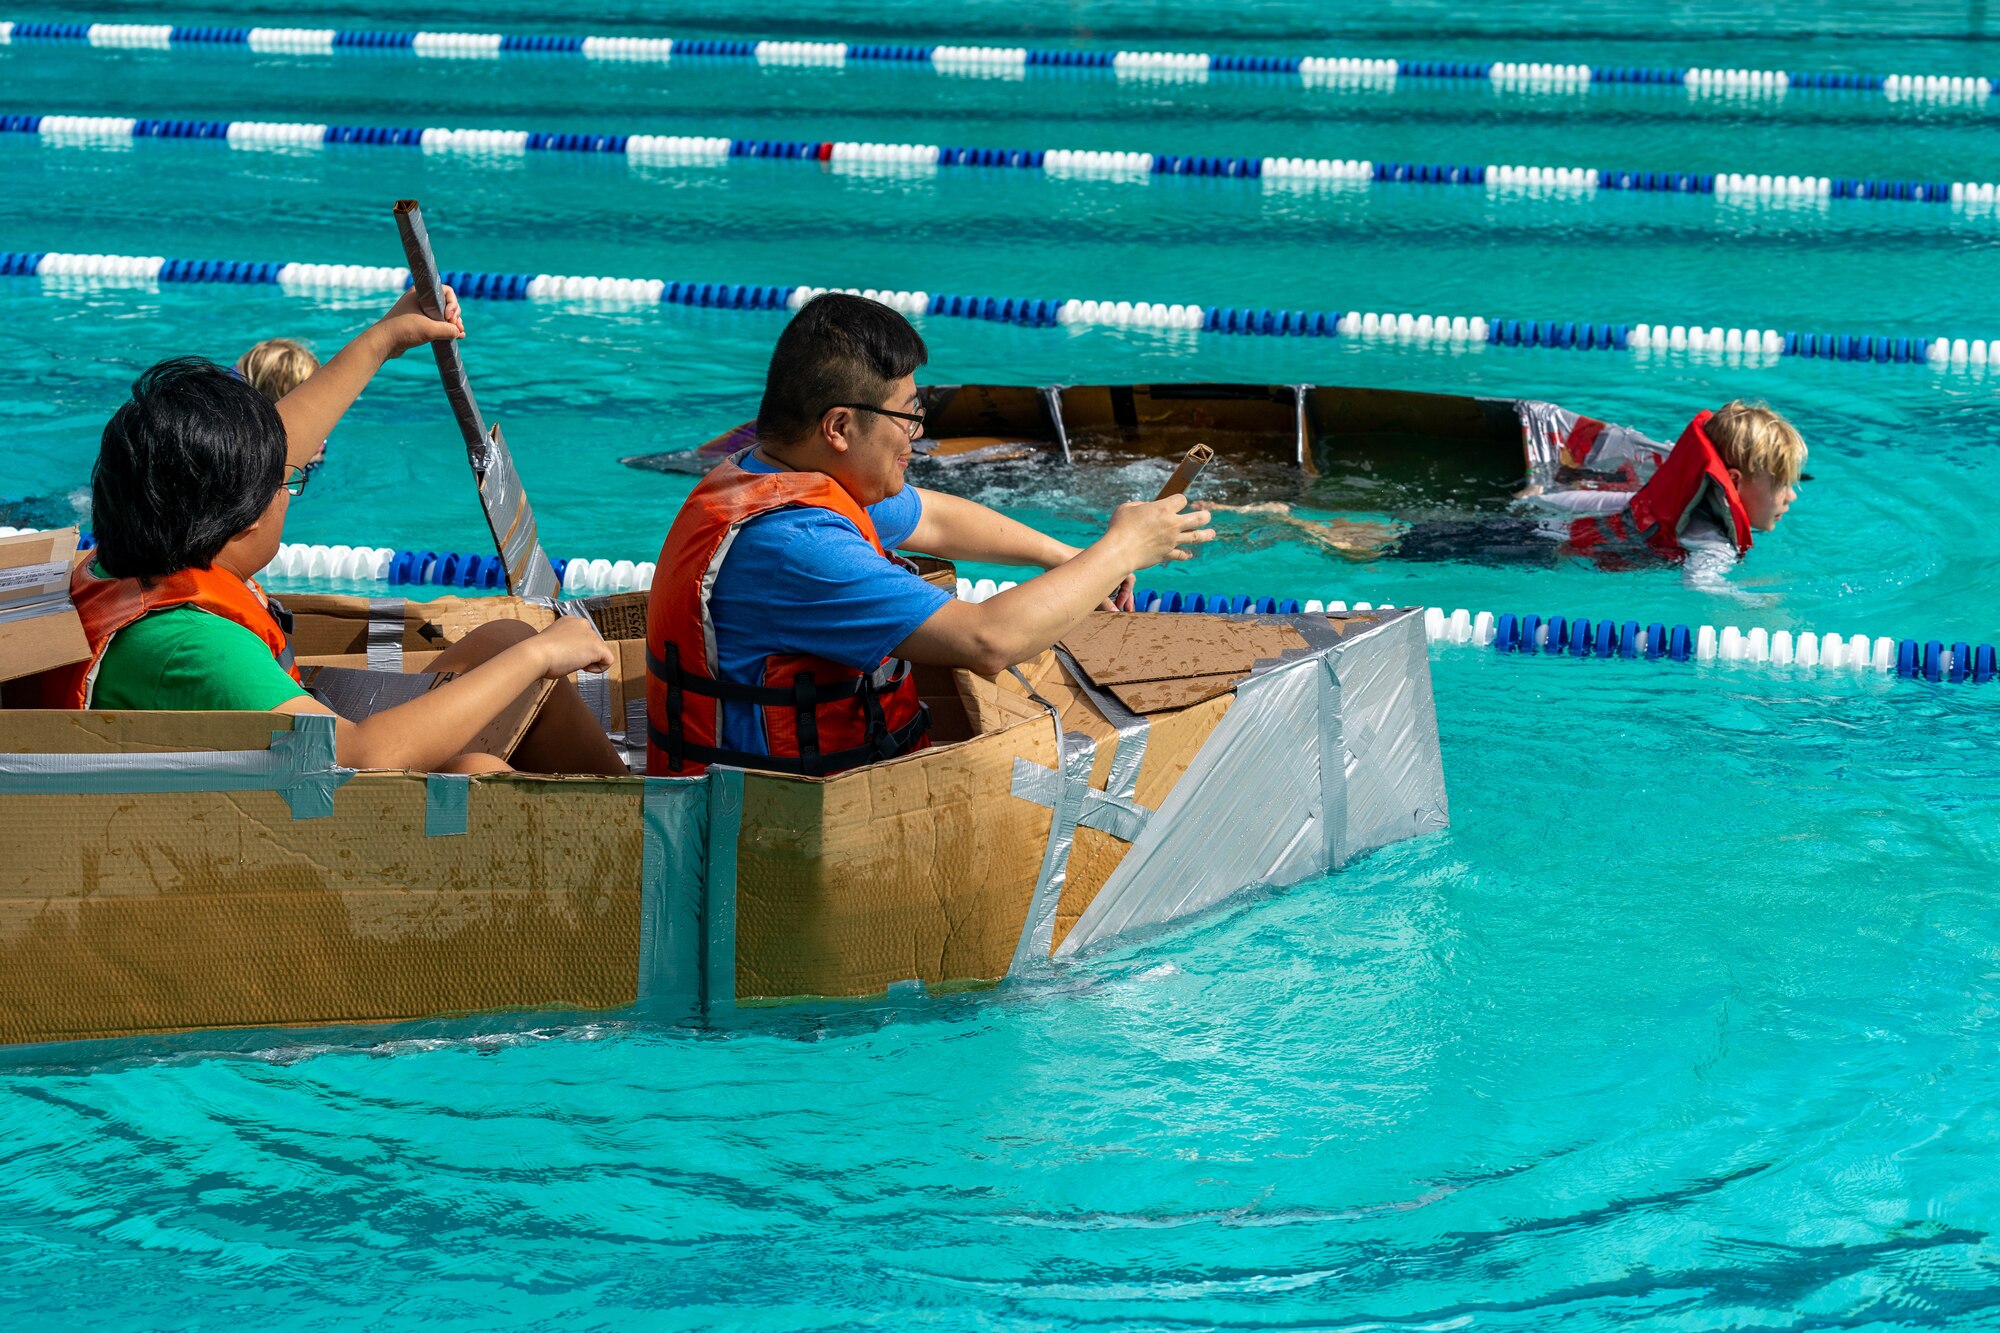 Participants race against each other during the Cardboard Regatta place their boats in the water and get ready to race at Keesler Air Force Base, Mississippi, July 15, 2023.